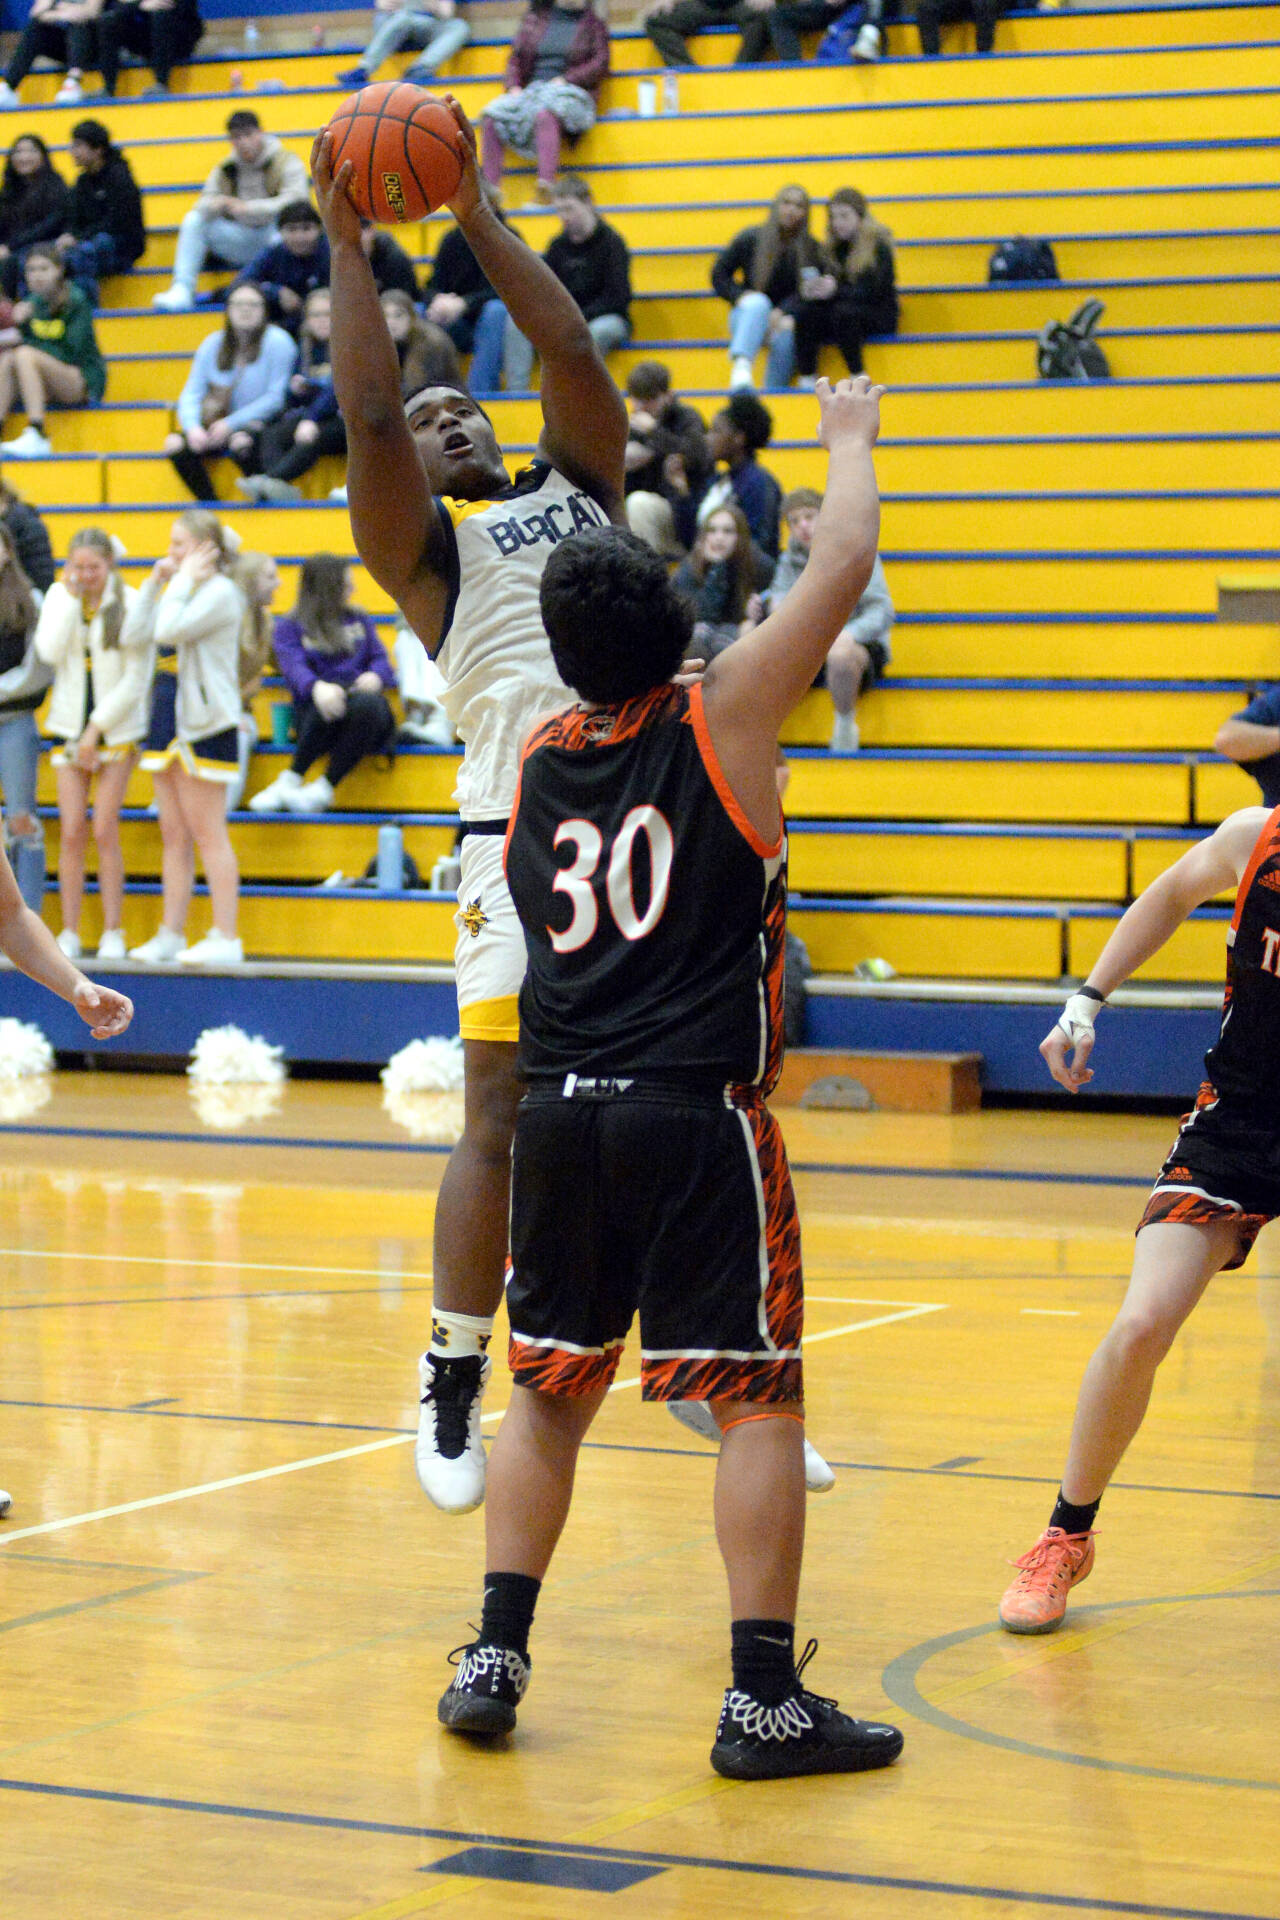 RYAN SPARKS / THE DAILY WORLD 
Aberdeen center Jabron Brooks, left, grabs a rebound over Centralia’s Carlos Vallejo (30) during the Bobcats’ 50-49 win on Tuesday at Sam Benn Gym in Aberdeen.